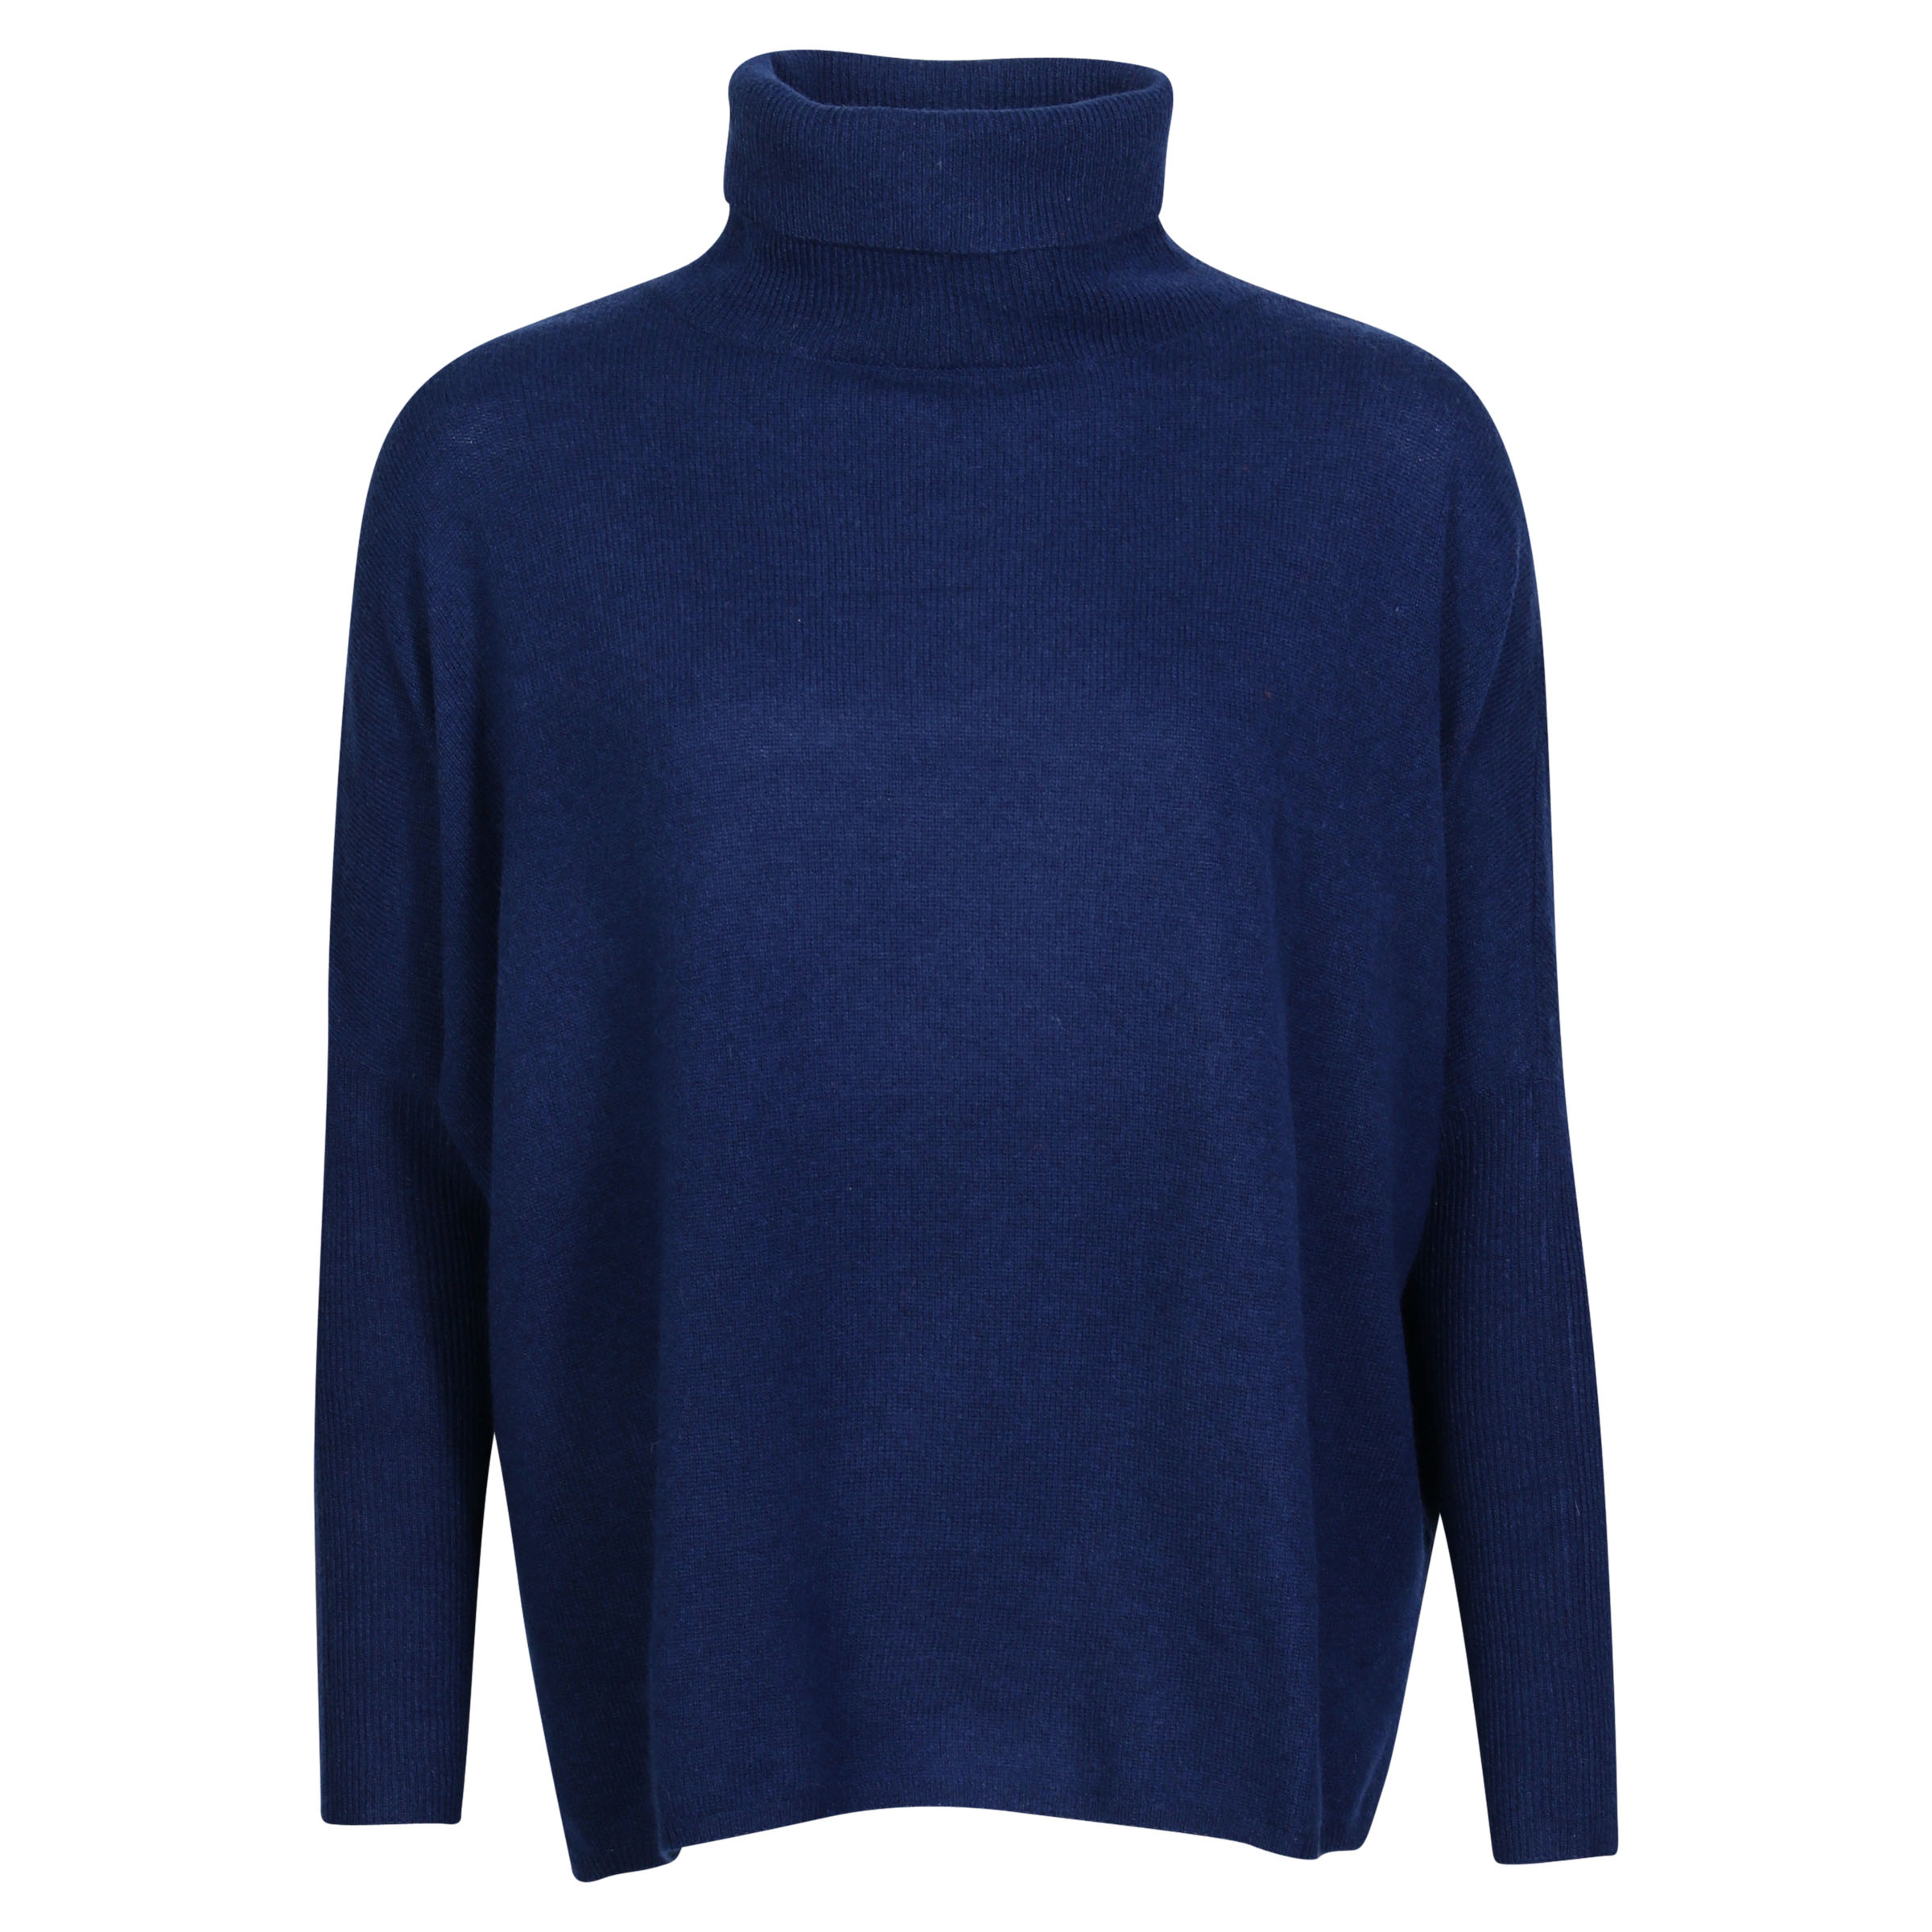 Absolut Cashmere Oversized Turtle Neck Sweater Clara in Royal Blue